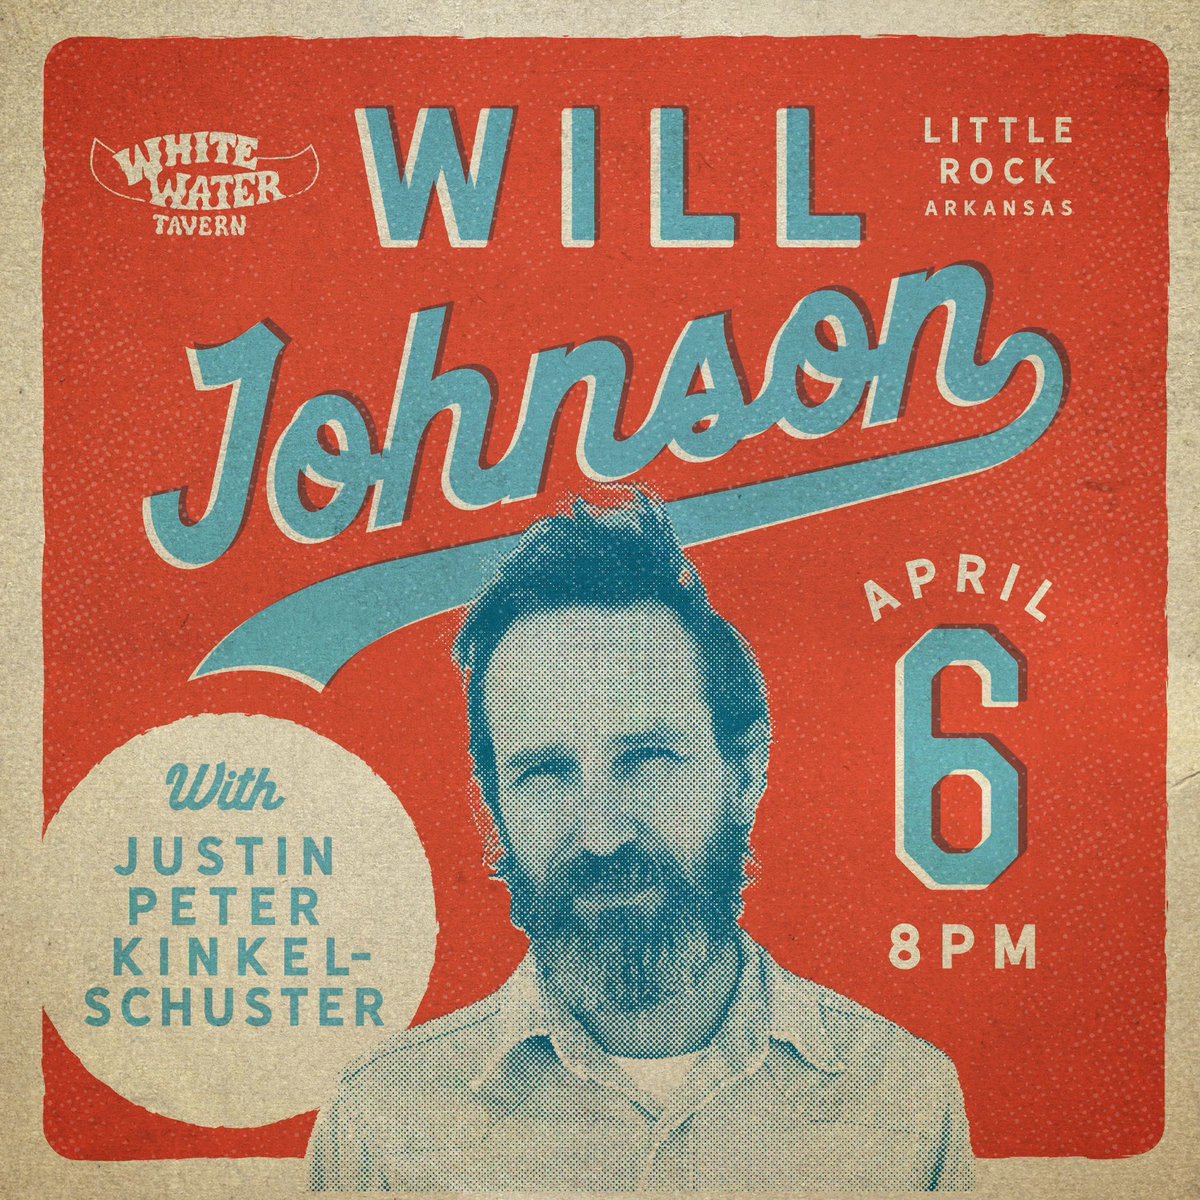 COOL SHOW ALERT! Will Johnson with Justin Peter Kinkel-Schuster at White Water Tavern in Little Rock on Saturday, April 6. The White Water Tavern 2500 West 7th Street Little Rock, AR 72205 Tickets at whitewatertavern.com @WillJohnsonTX @WhiteWaterBarAR